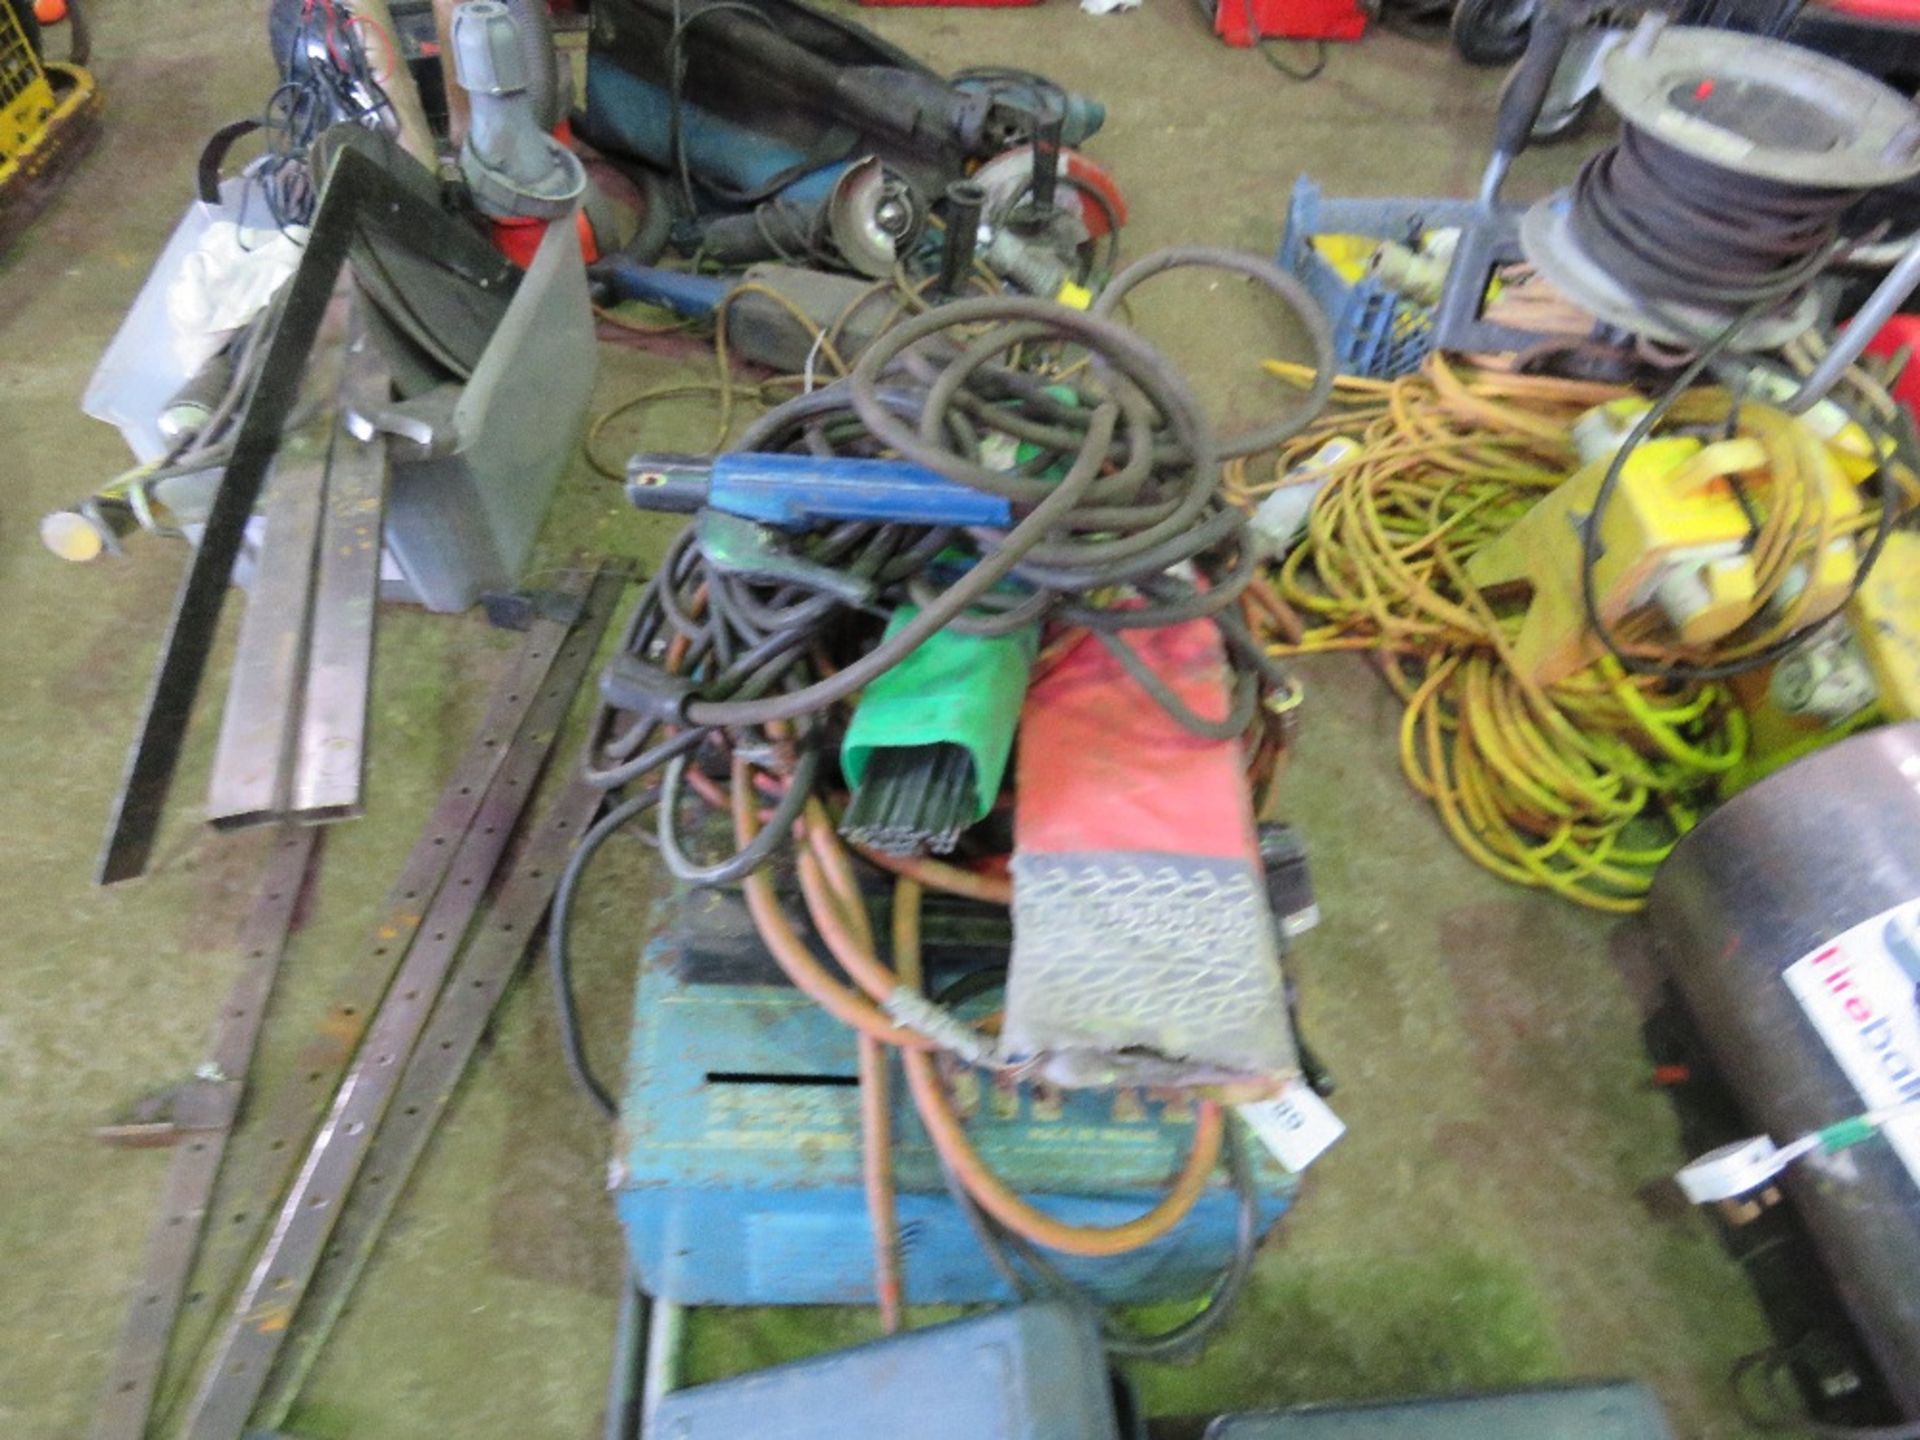 2 X SIP 140 240VOLT ARC WELDERS PLUS RODS AND LEADS, DIRECT FROM COMPANY LIQUIDATION - Image 2 of 3